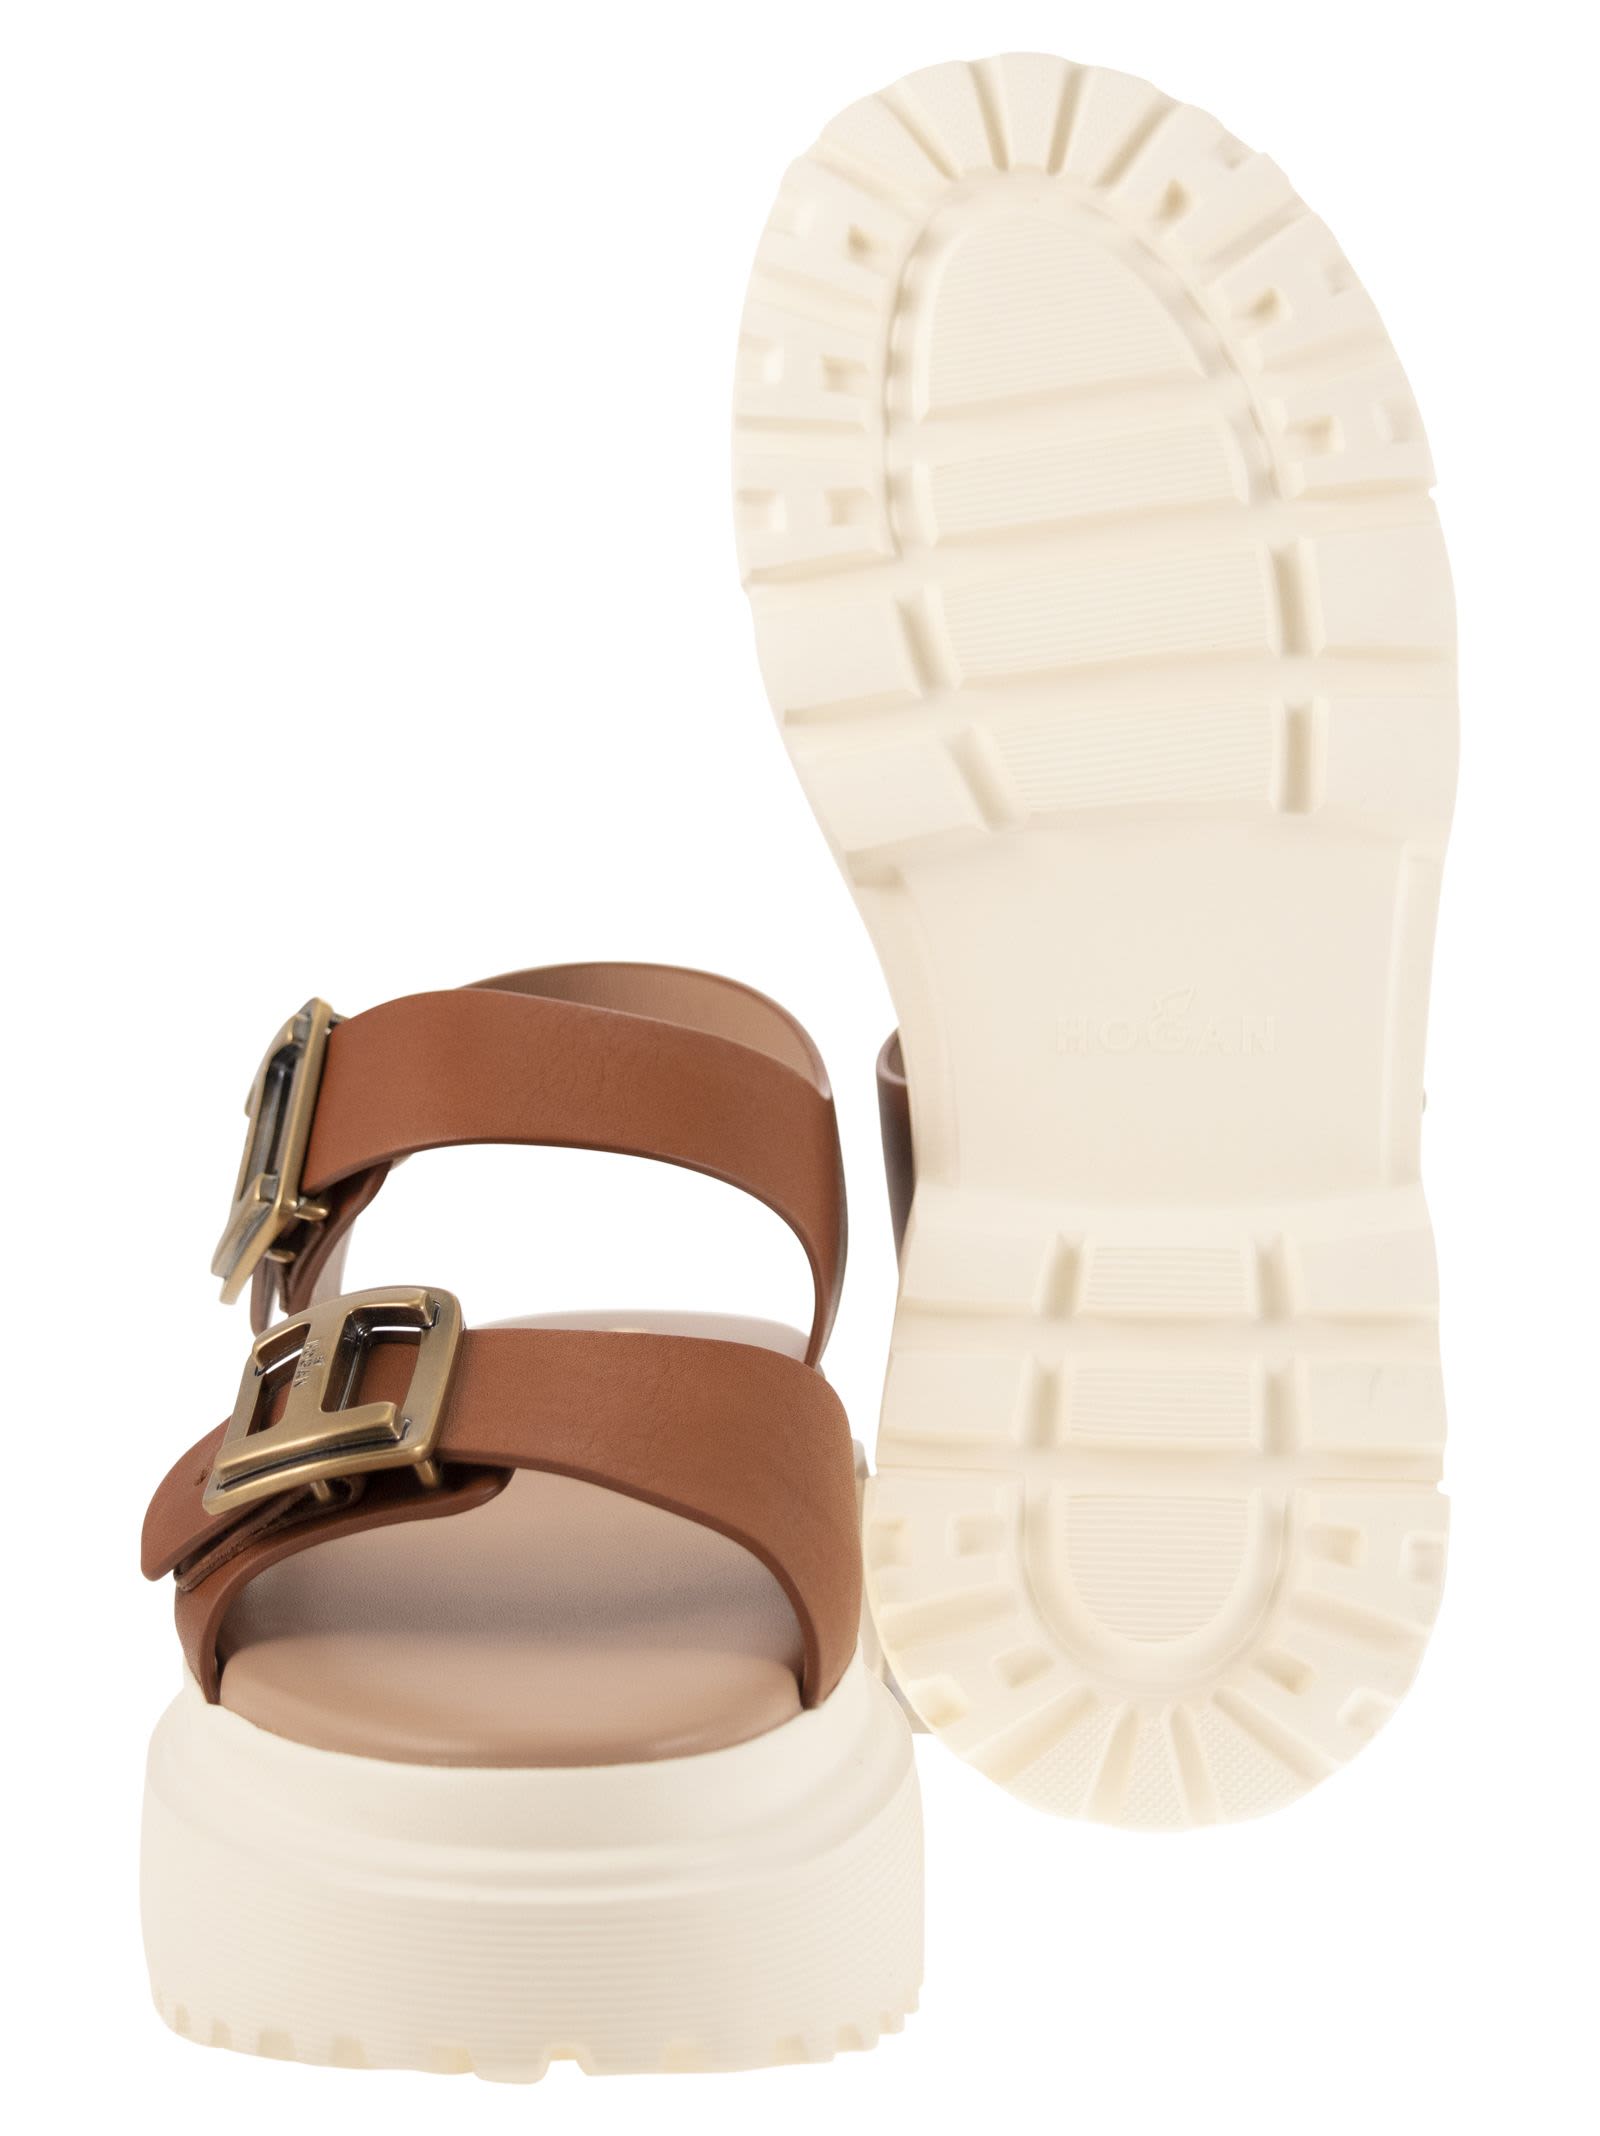 Shop Hogan H644 - Sandal With Two Buckles In Brown